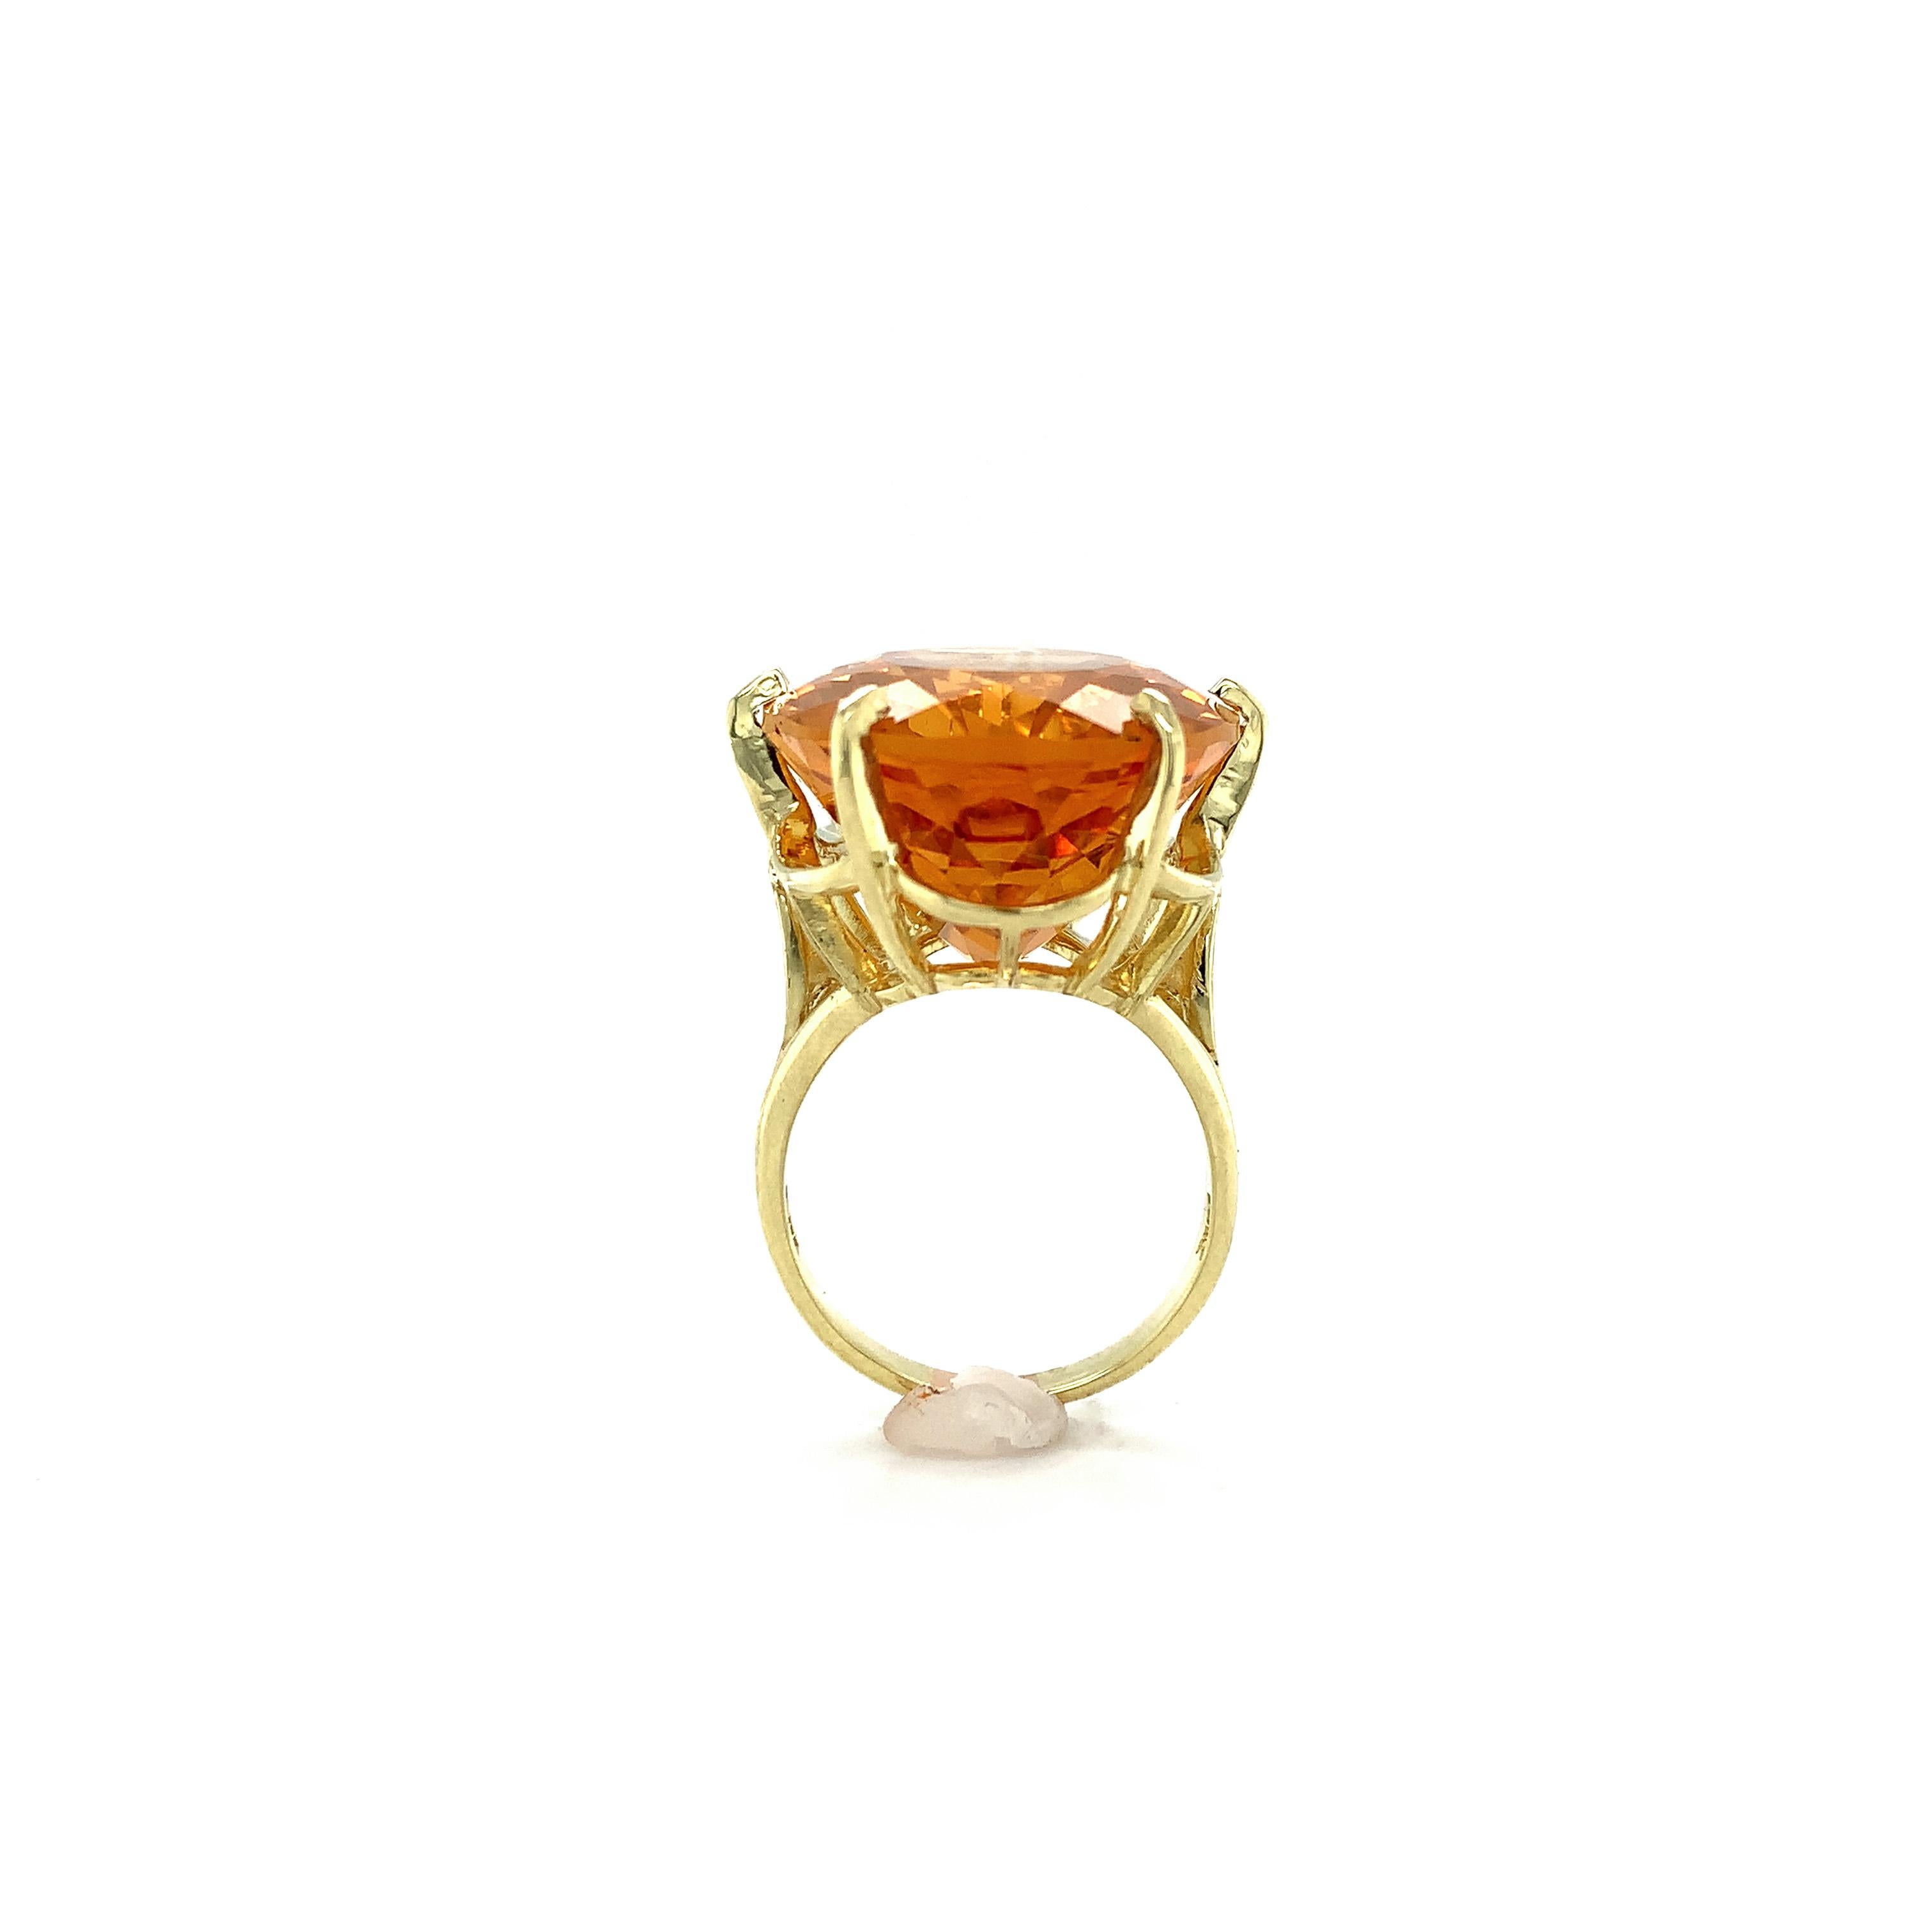 Oval Cut 18K yellow gold Ring with a Huge 37 carat Citrine For Sale